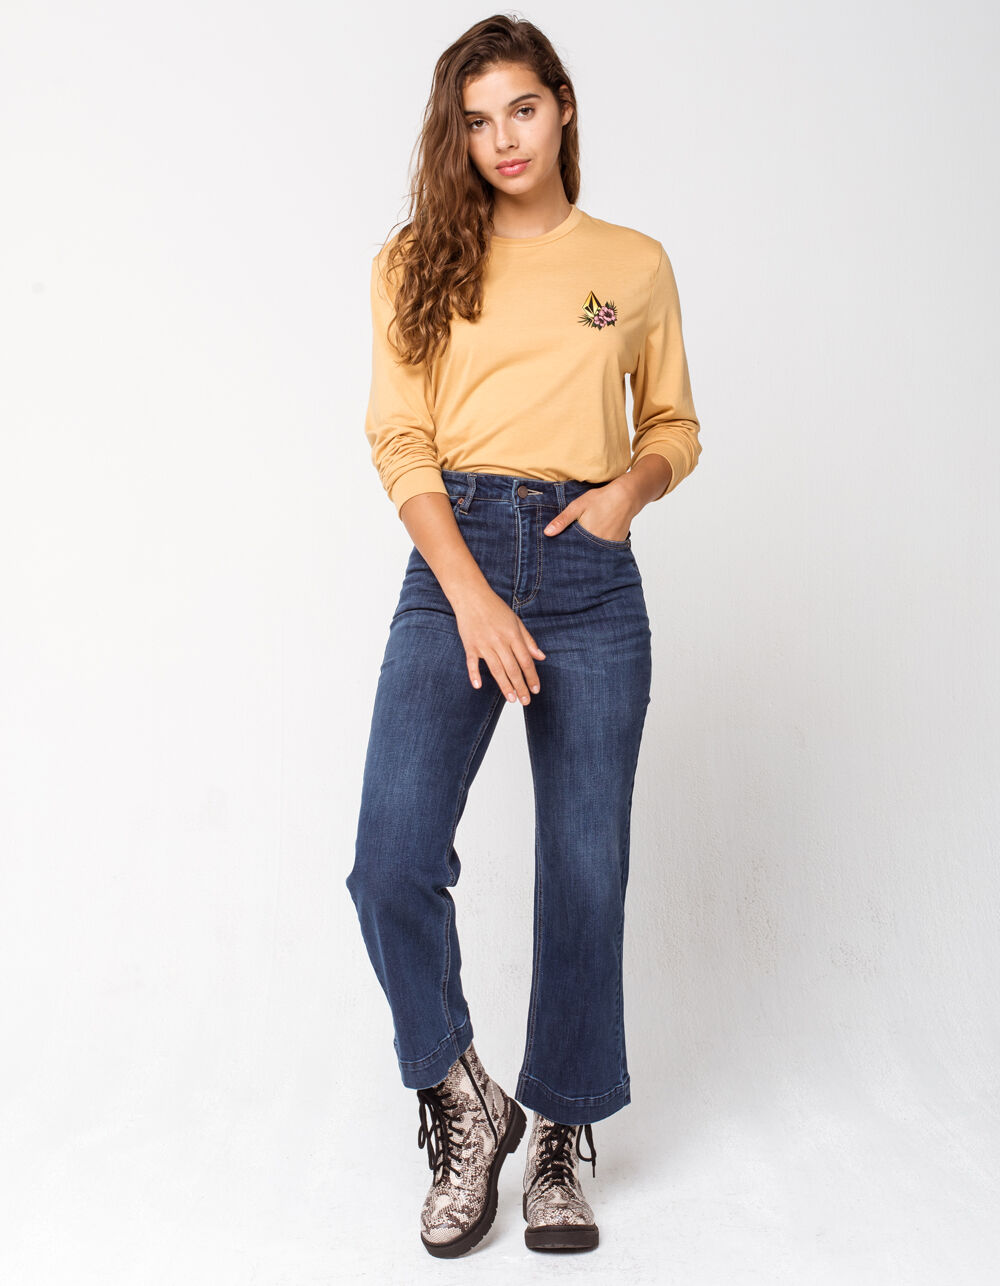 VOLCOM So Far Out Womens Tee - YELLOW | Tillys